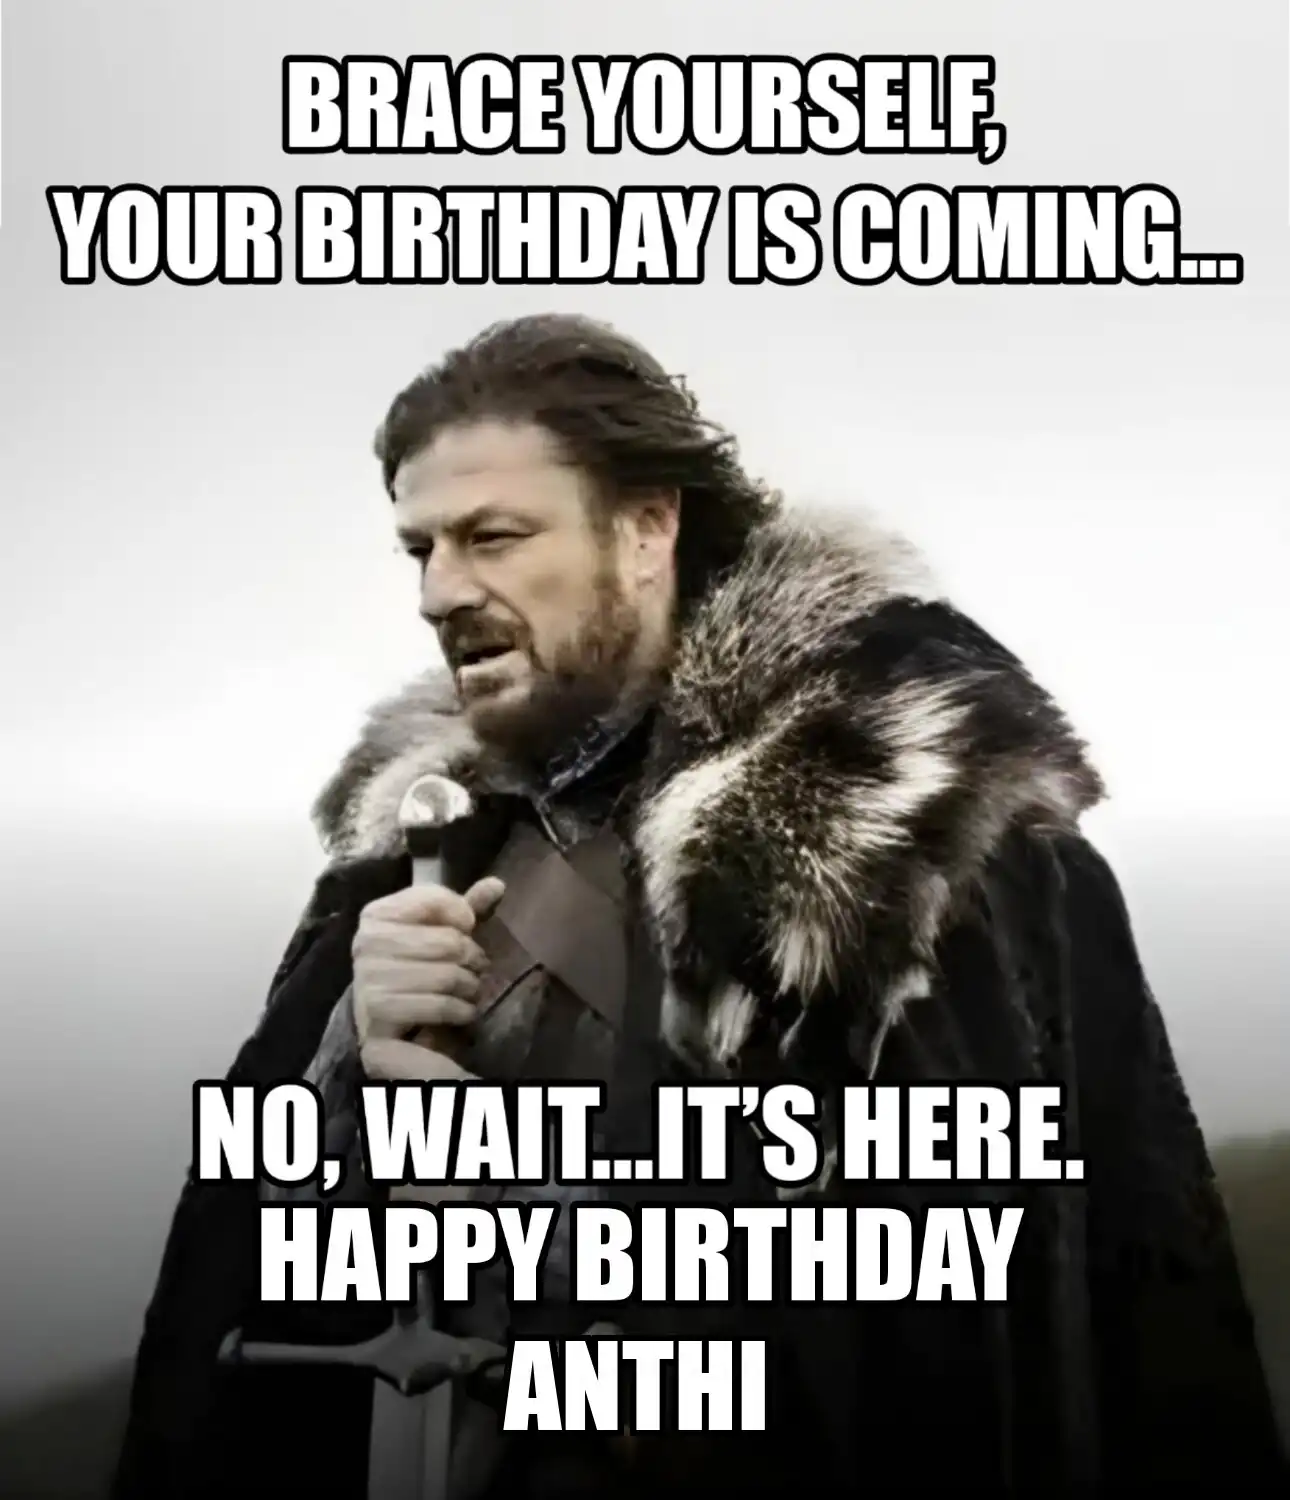 Happy Birthday Anthi Brace Yourself Your Birthday Is Coming Meme